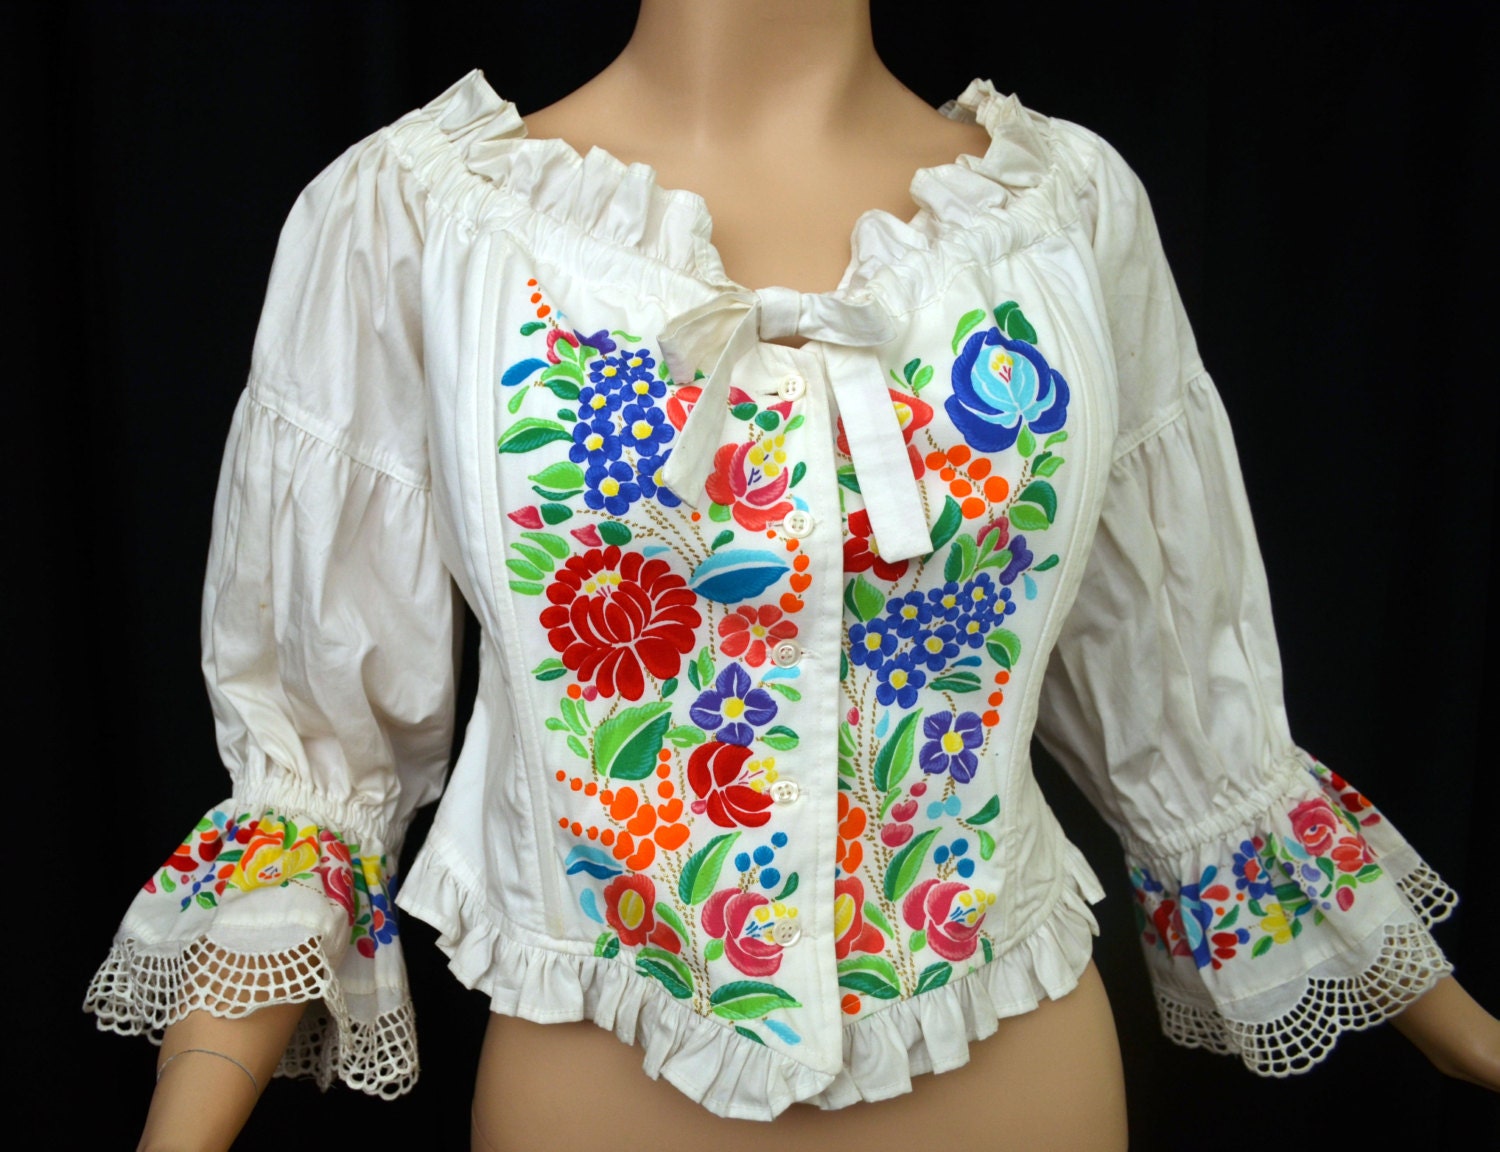 Vintage GOTTEX Hand Painted Top // Bohemian Peasant Blouse // Victorian Inspired Boned Bodice - VintageDevotion